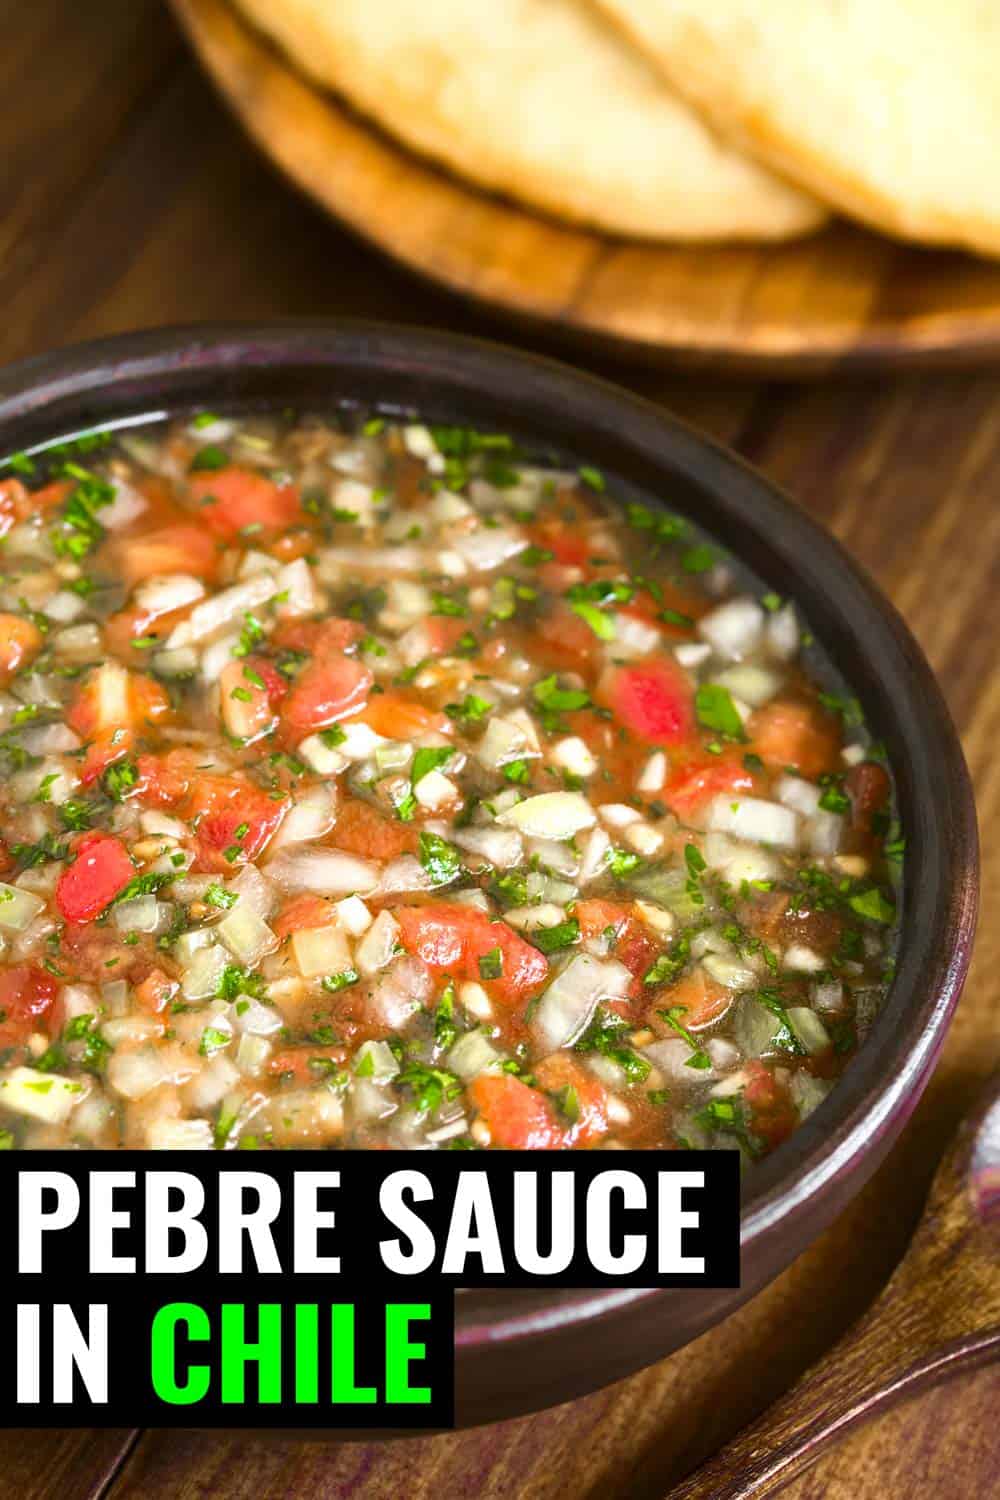 Chilean salsa known as pebre sauce on a table with bread